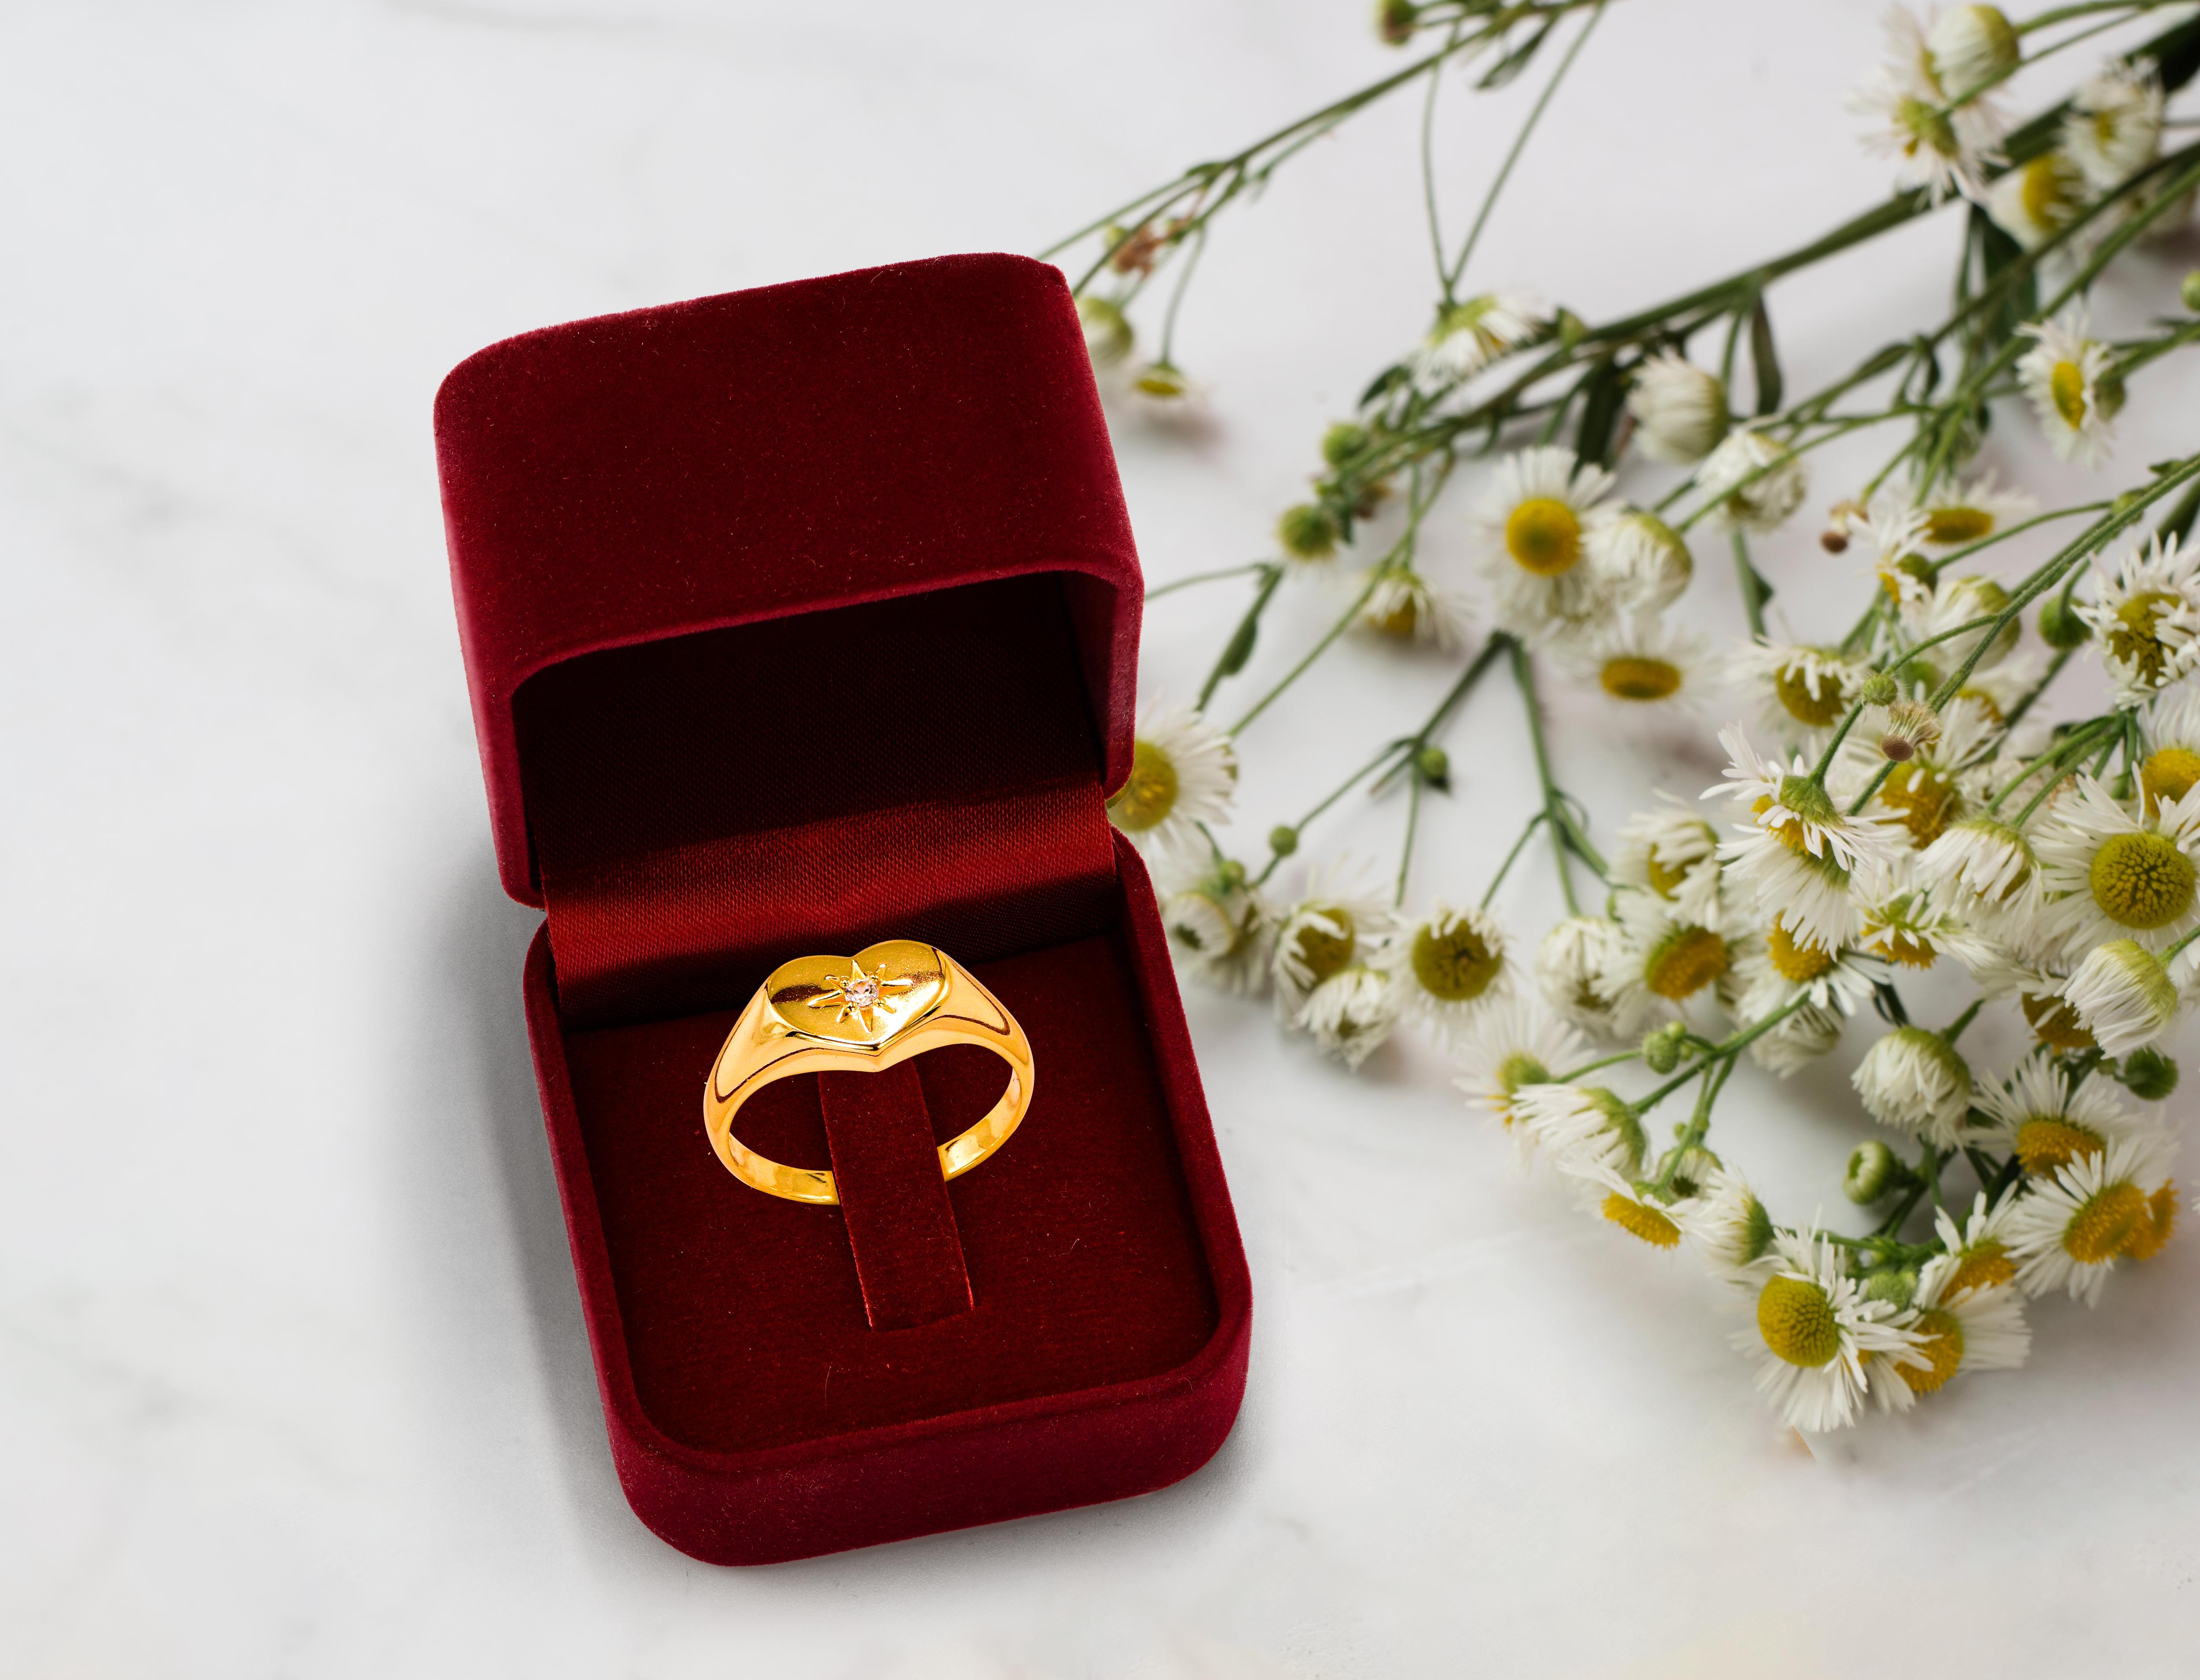 For Sale:  18K Genuine Gold Filled Heart Shape Signet Ring with 0.03 Carat Natural Diamond 7